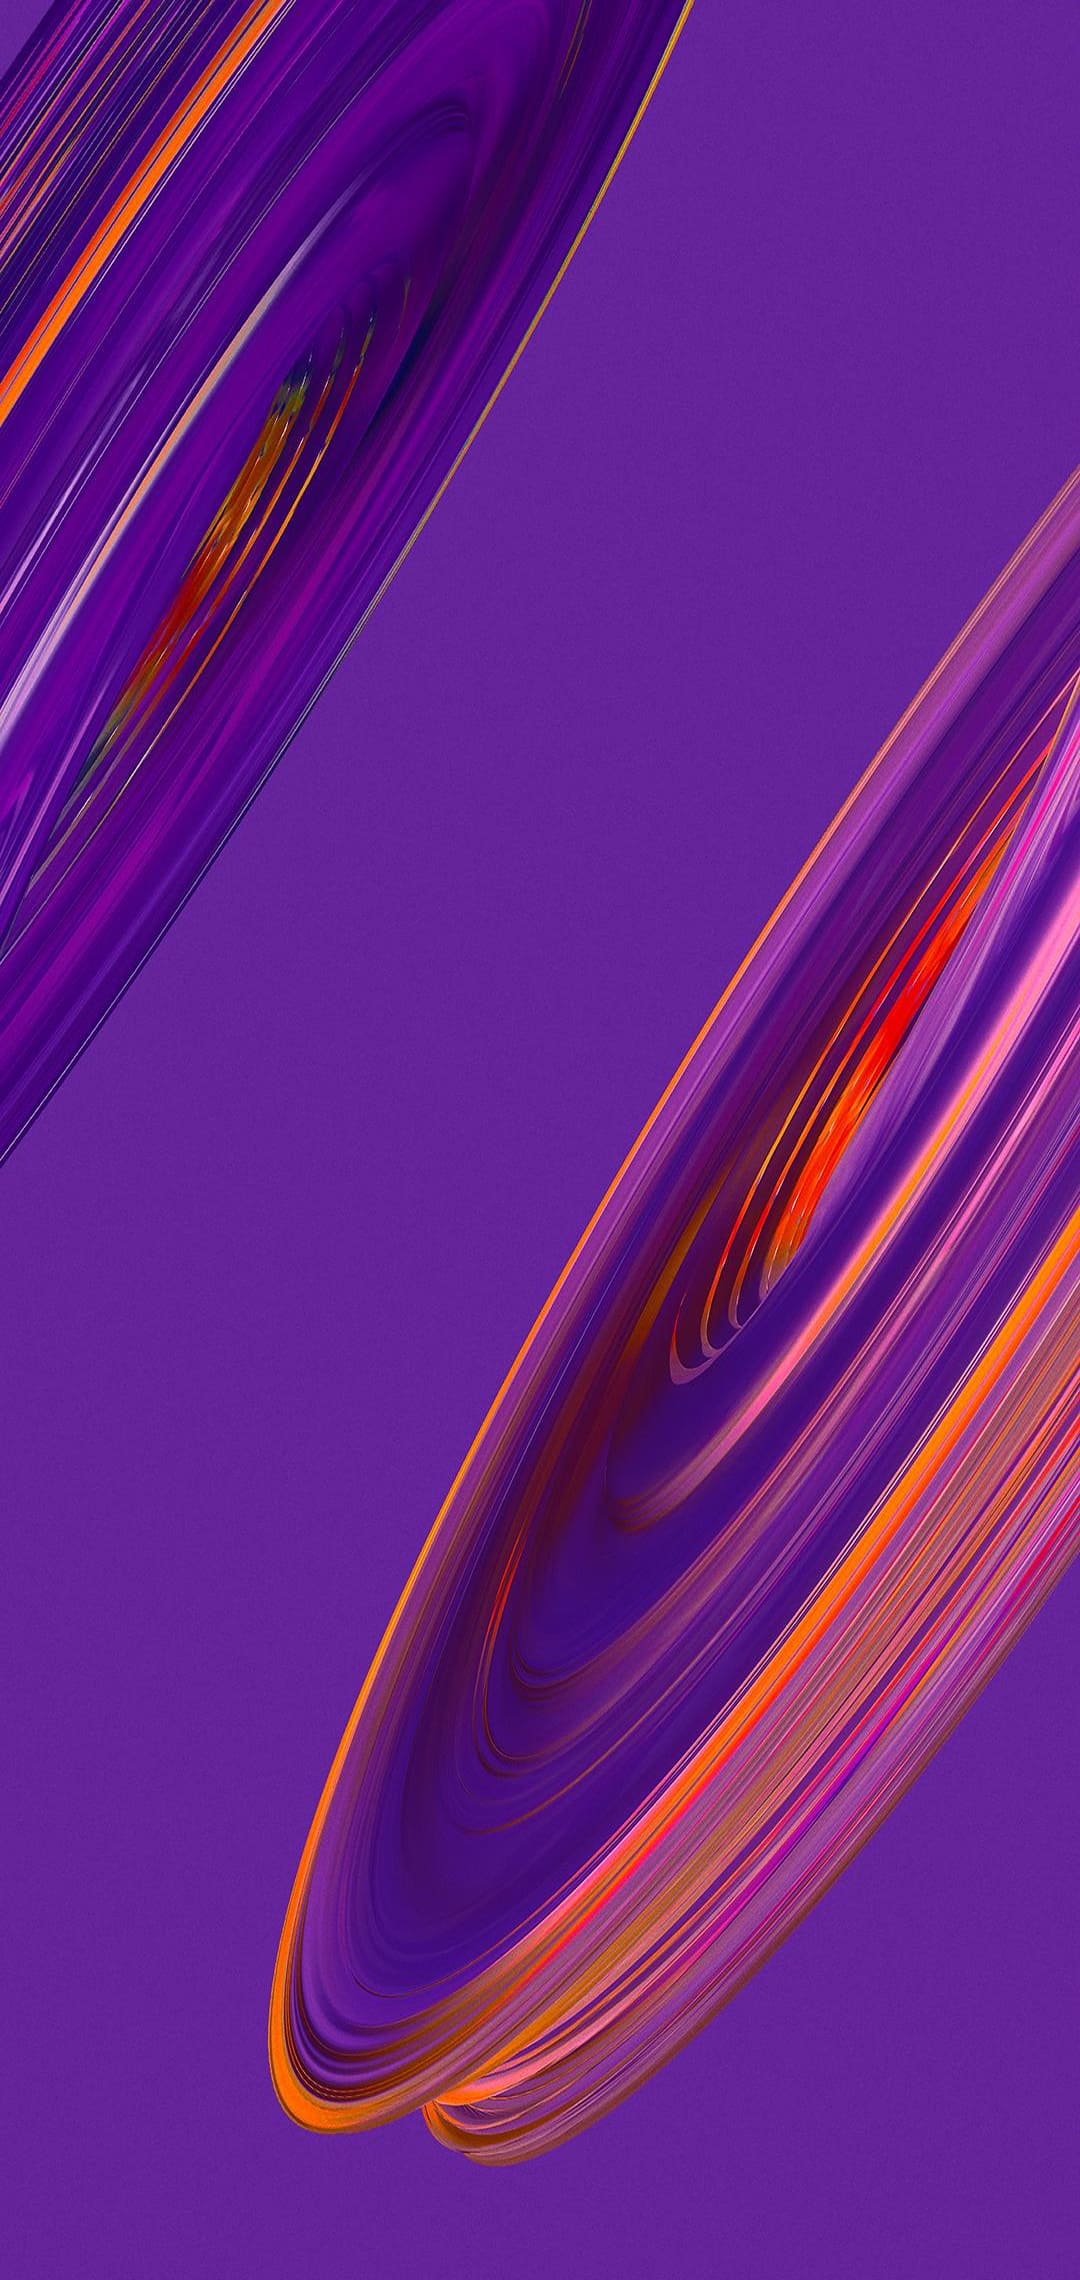 Paranoid Android 2019 purple wallpaper